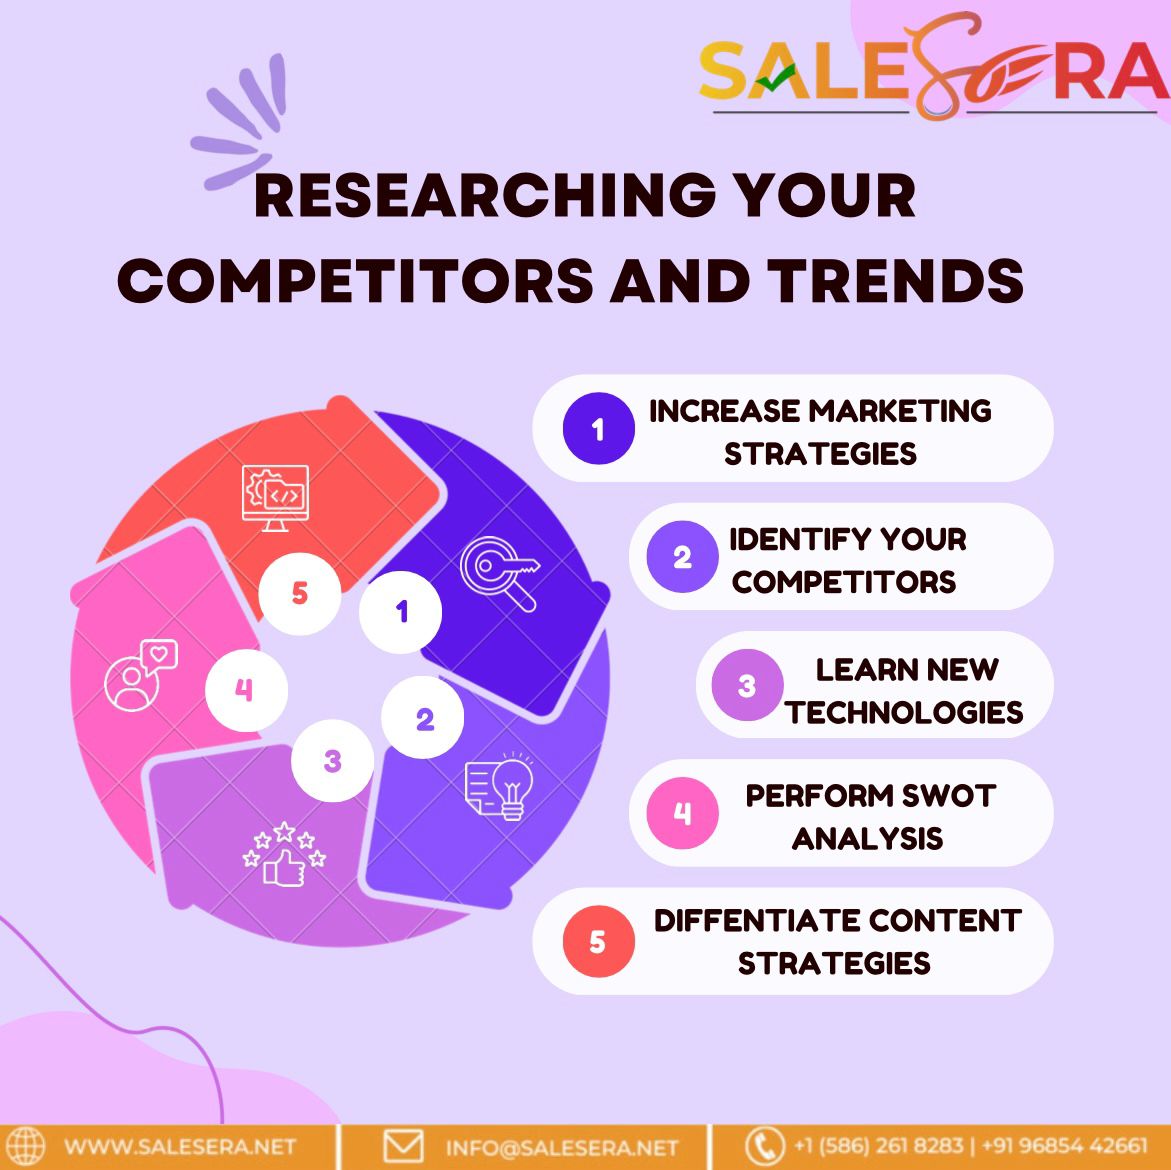 Competitive analysis is a strategy that involves researching major competitors to gain insight into their products, sales and marketing. #competitors #competitorslife #competitorstraining #Marketing  #Analytics  #contentstrategy  #marketingfunnel #conversionrates